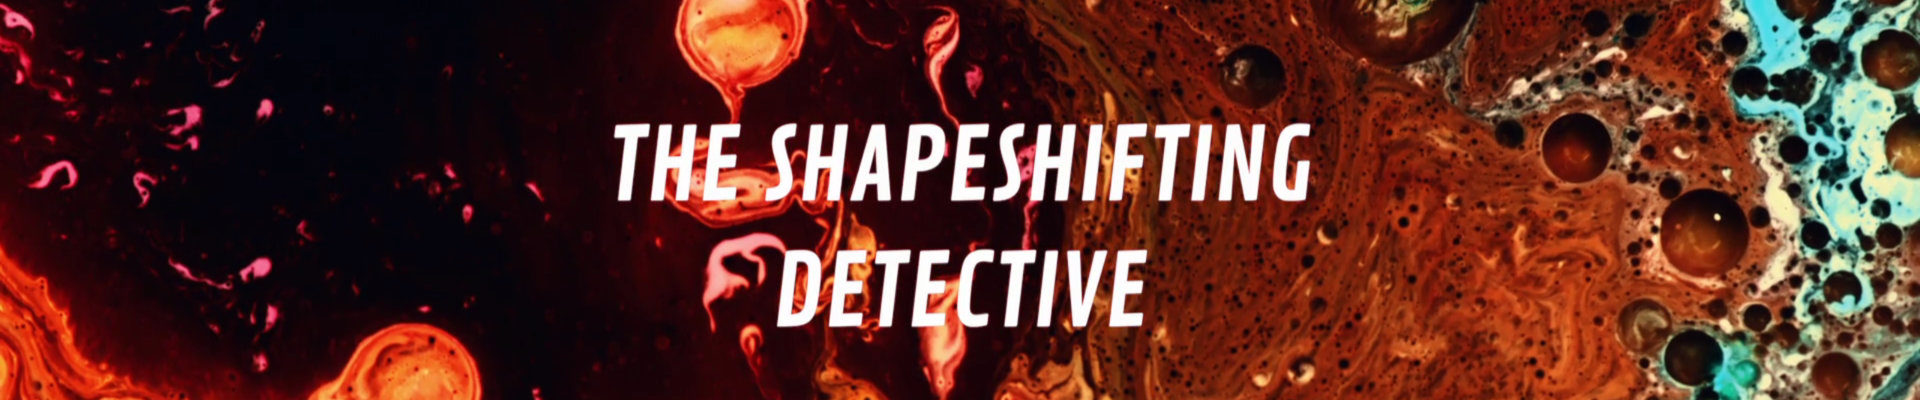 Quick thoughts on: The Shapeshifting Detective